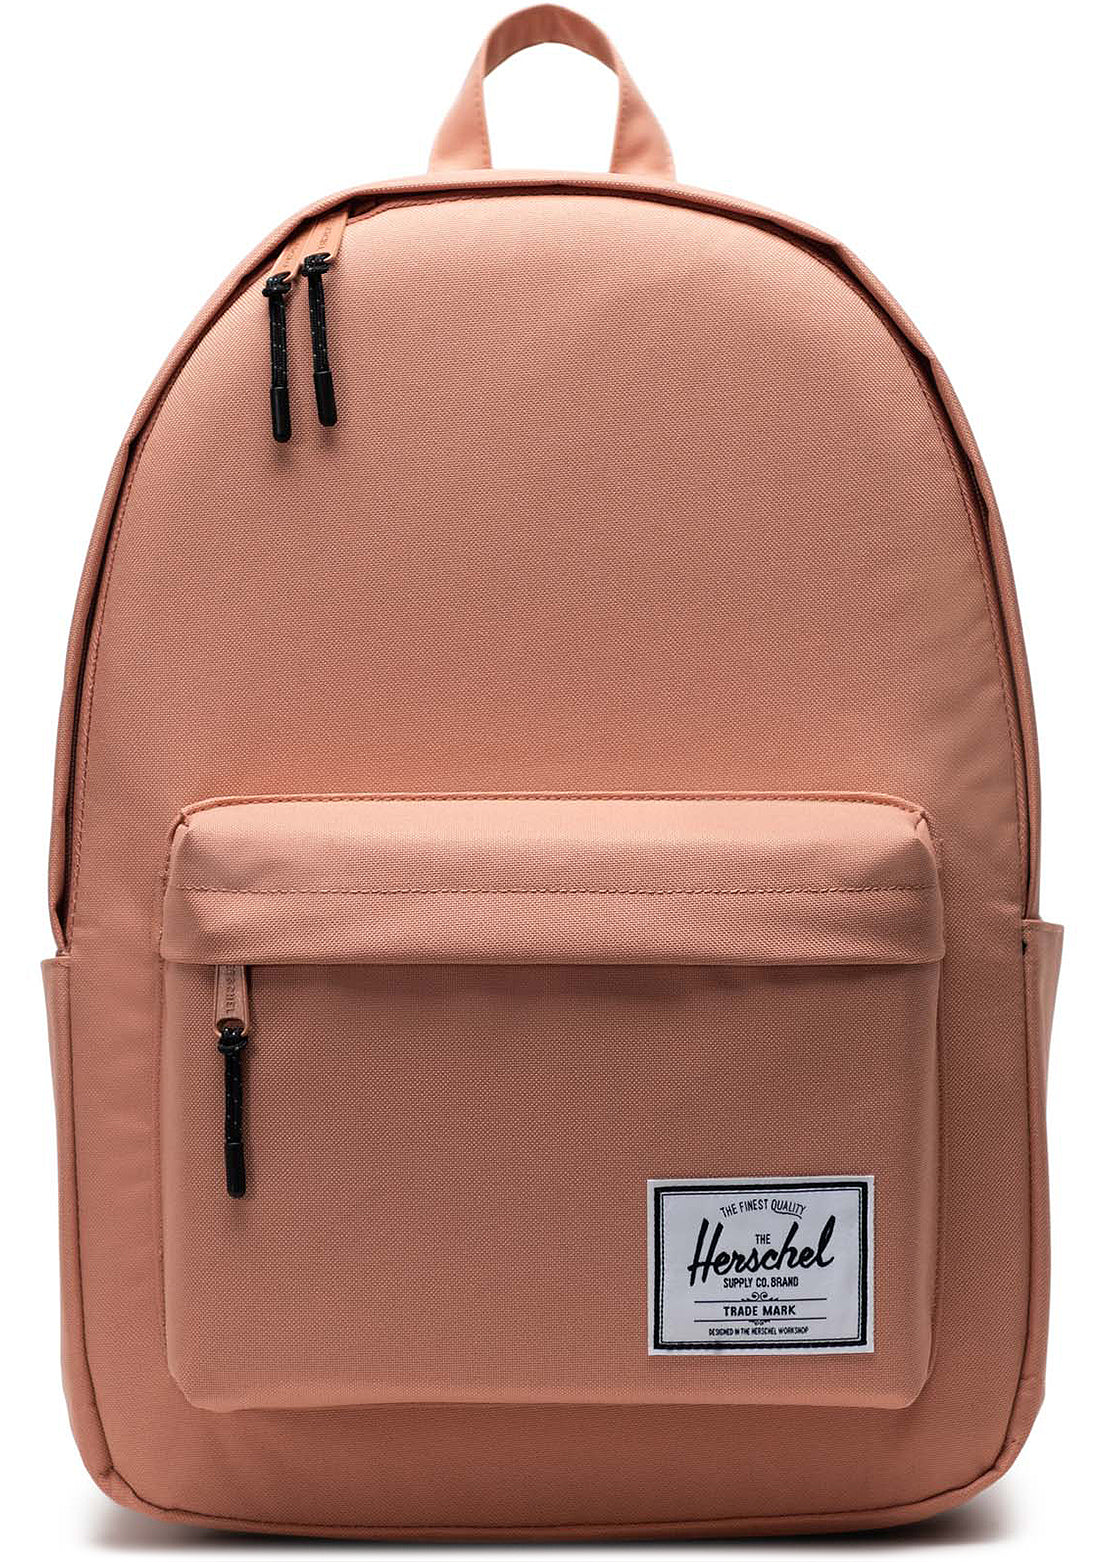 Herschel Supply Co. Classic XL Backpack - Rose Brown